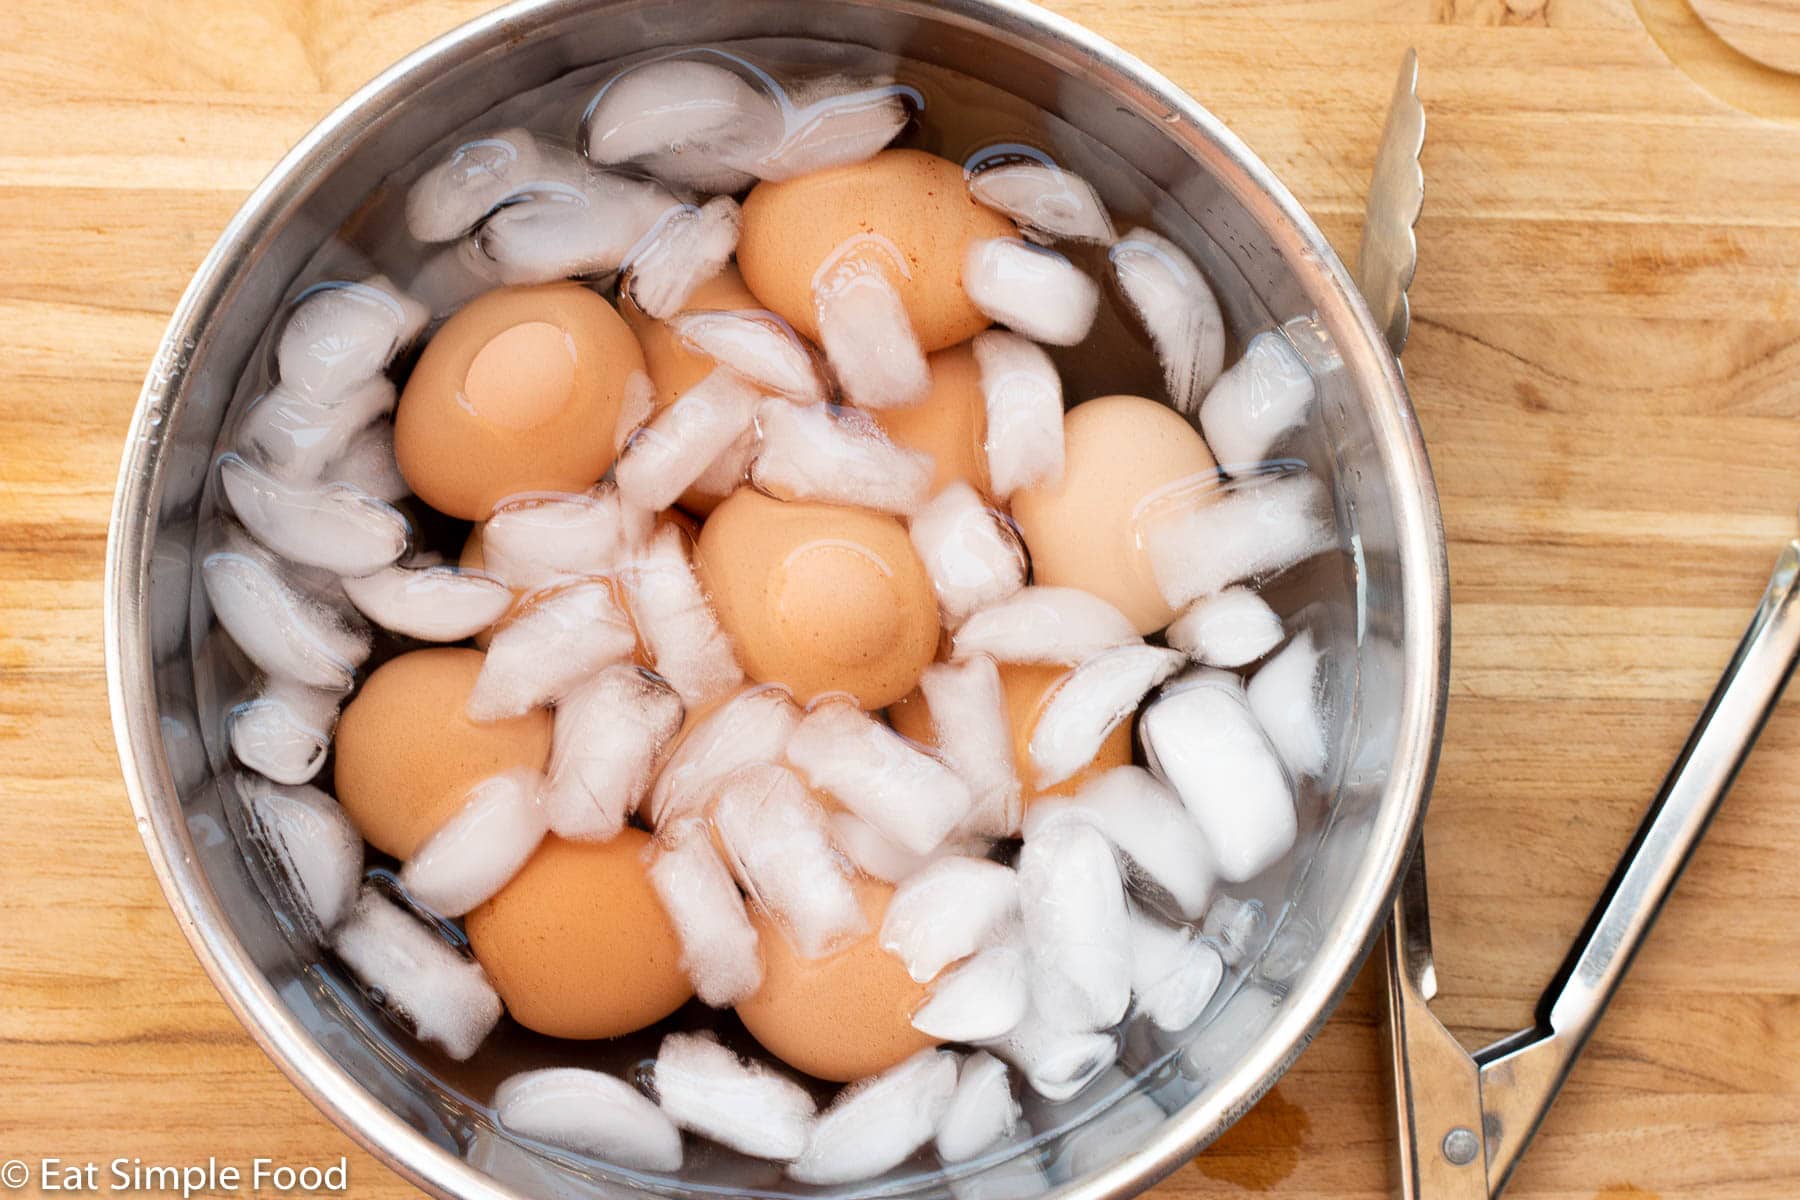 12 eggs in a stainless steel bowl filled with ice and water. Tongs on the side. On a wood cutting board. Top view.